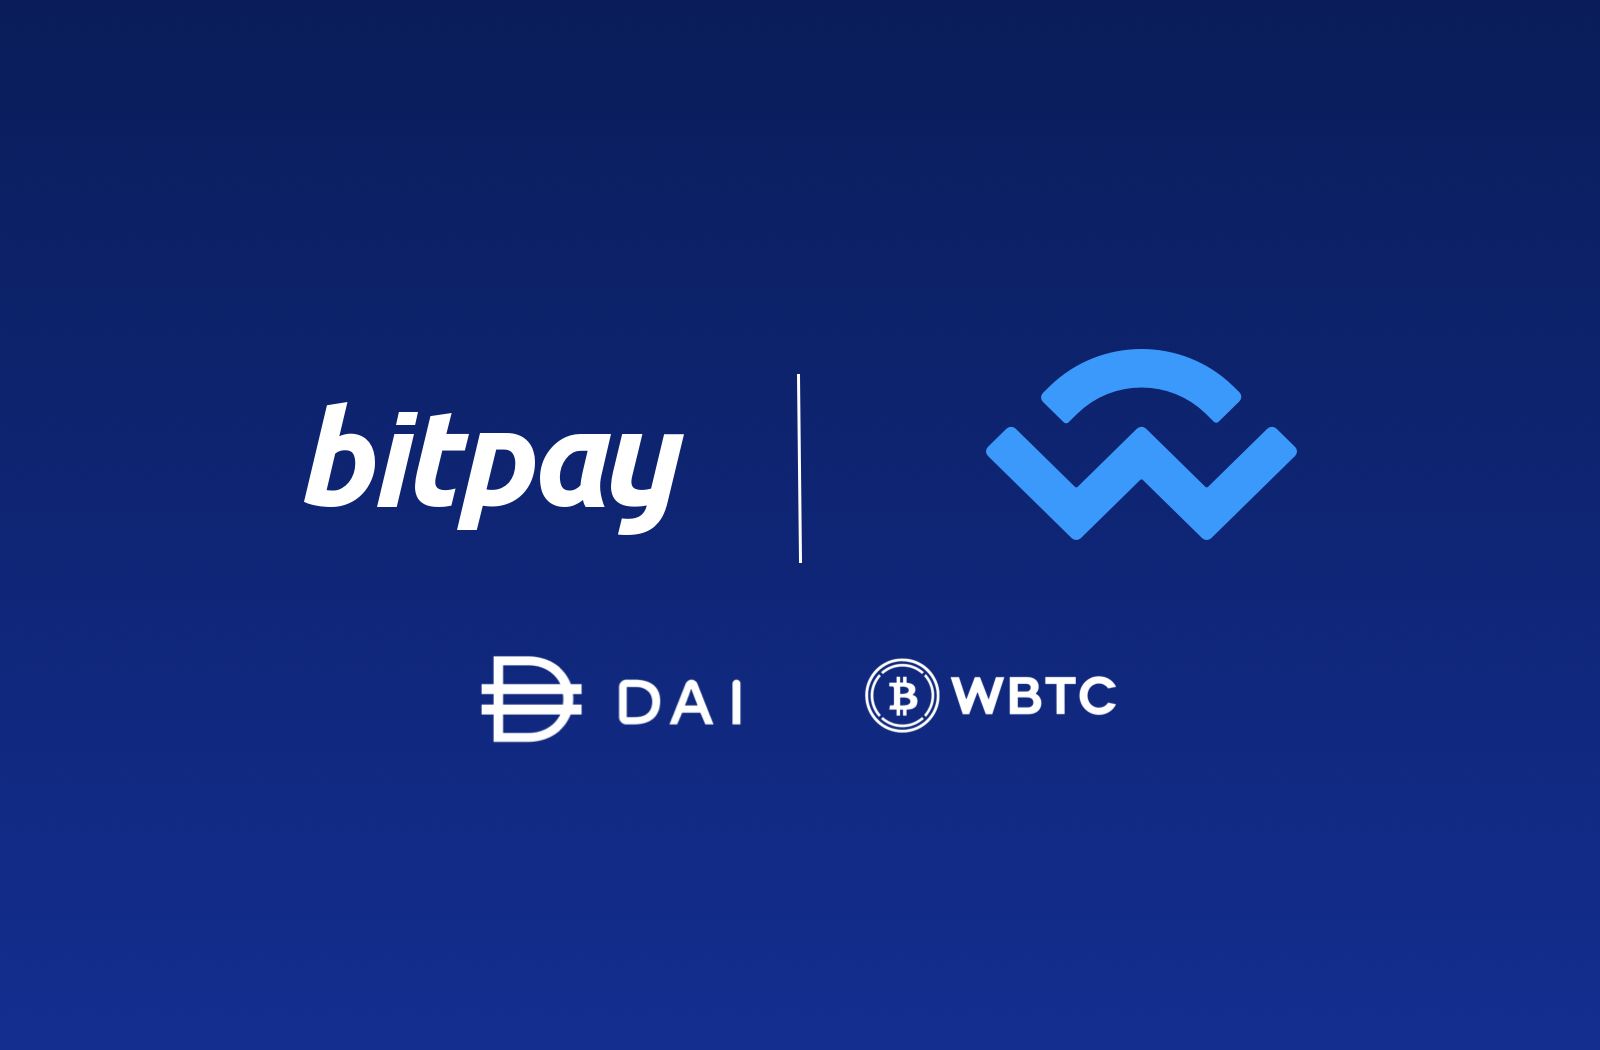 BitPay Wallet app integrates with WalletConnect